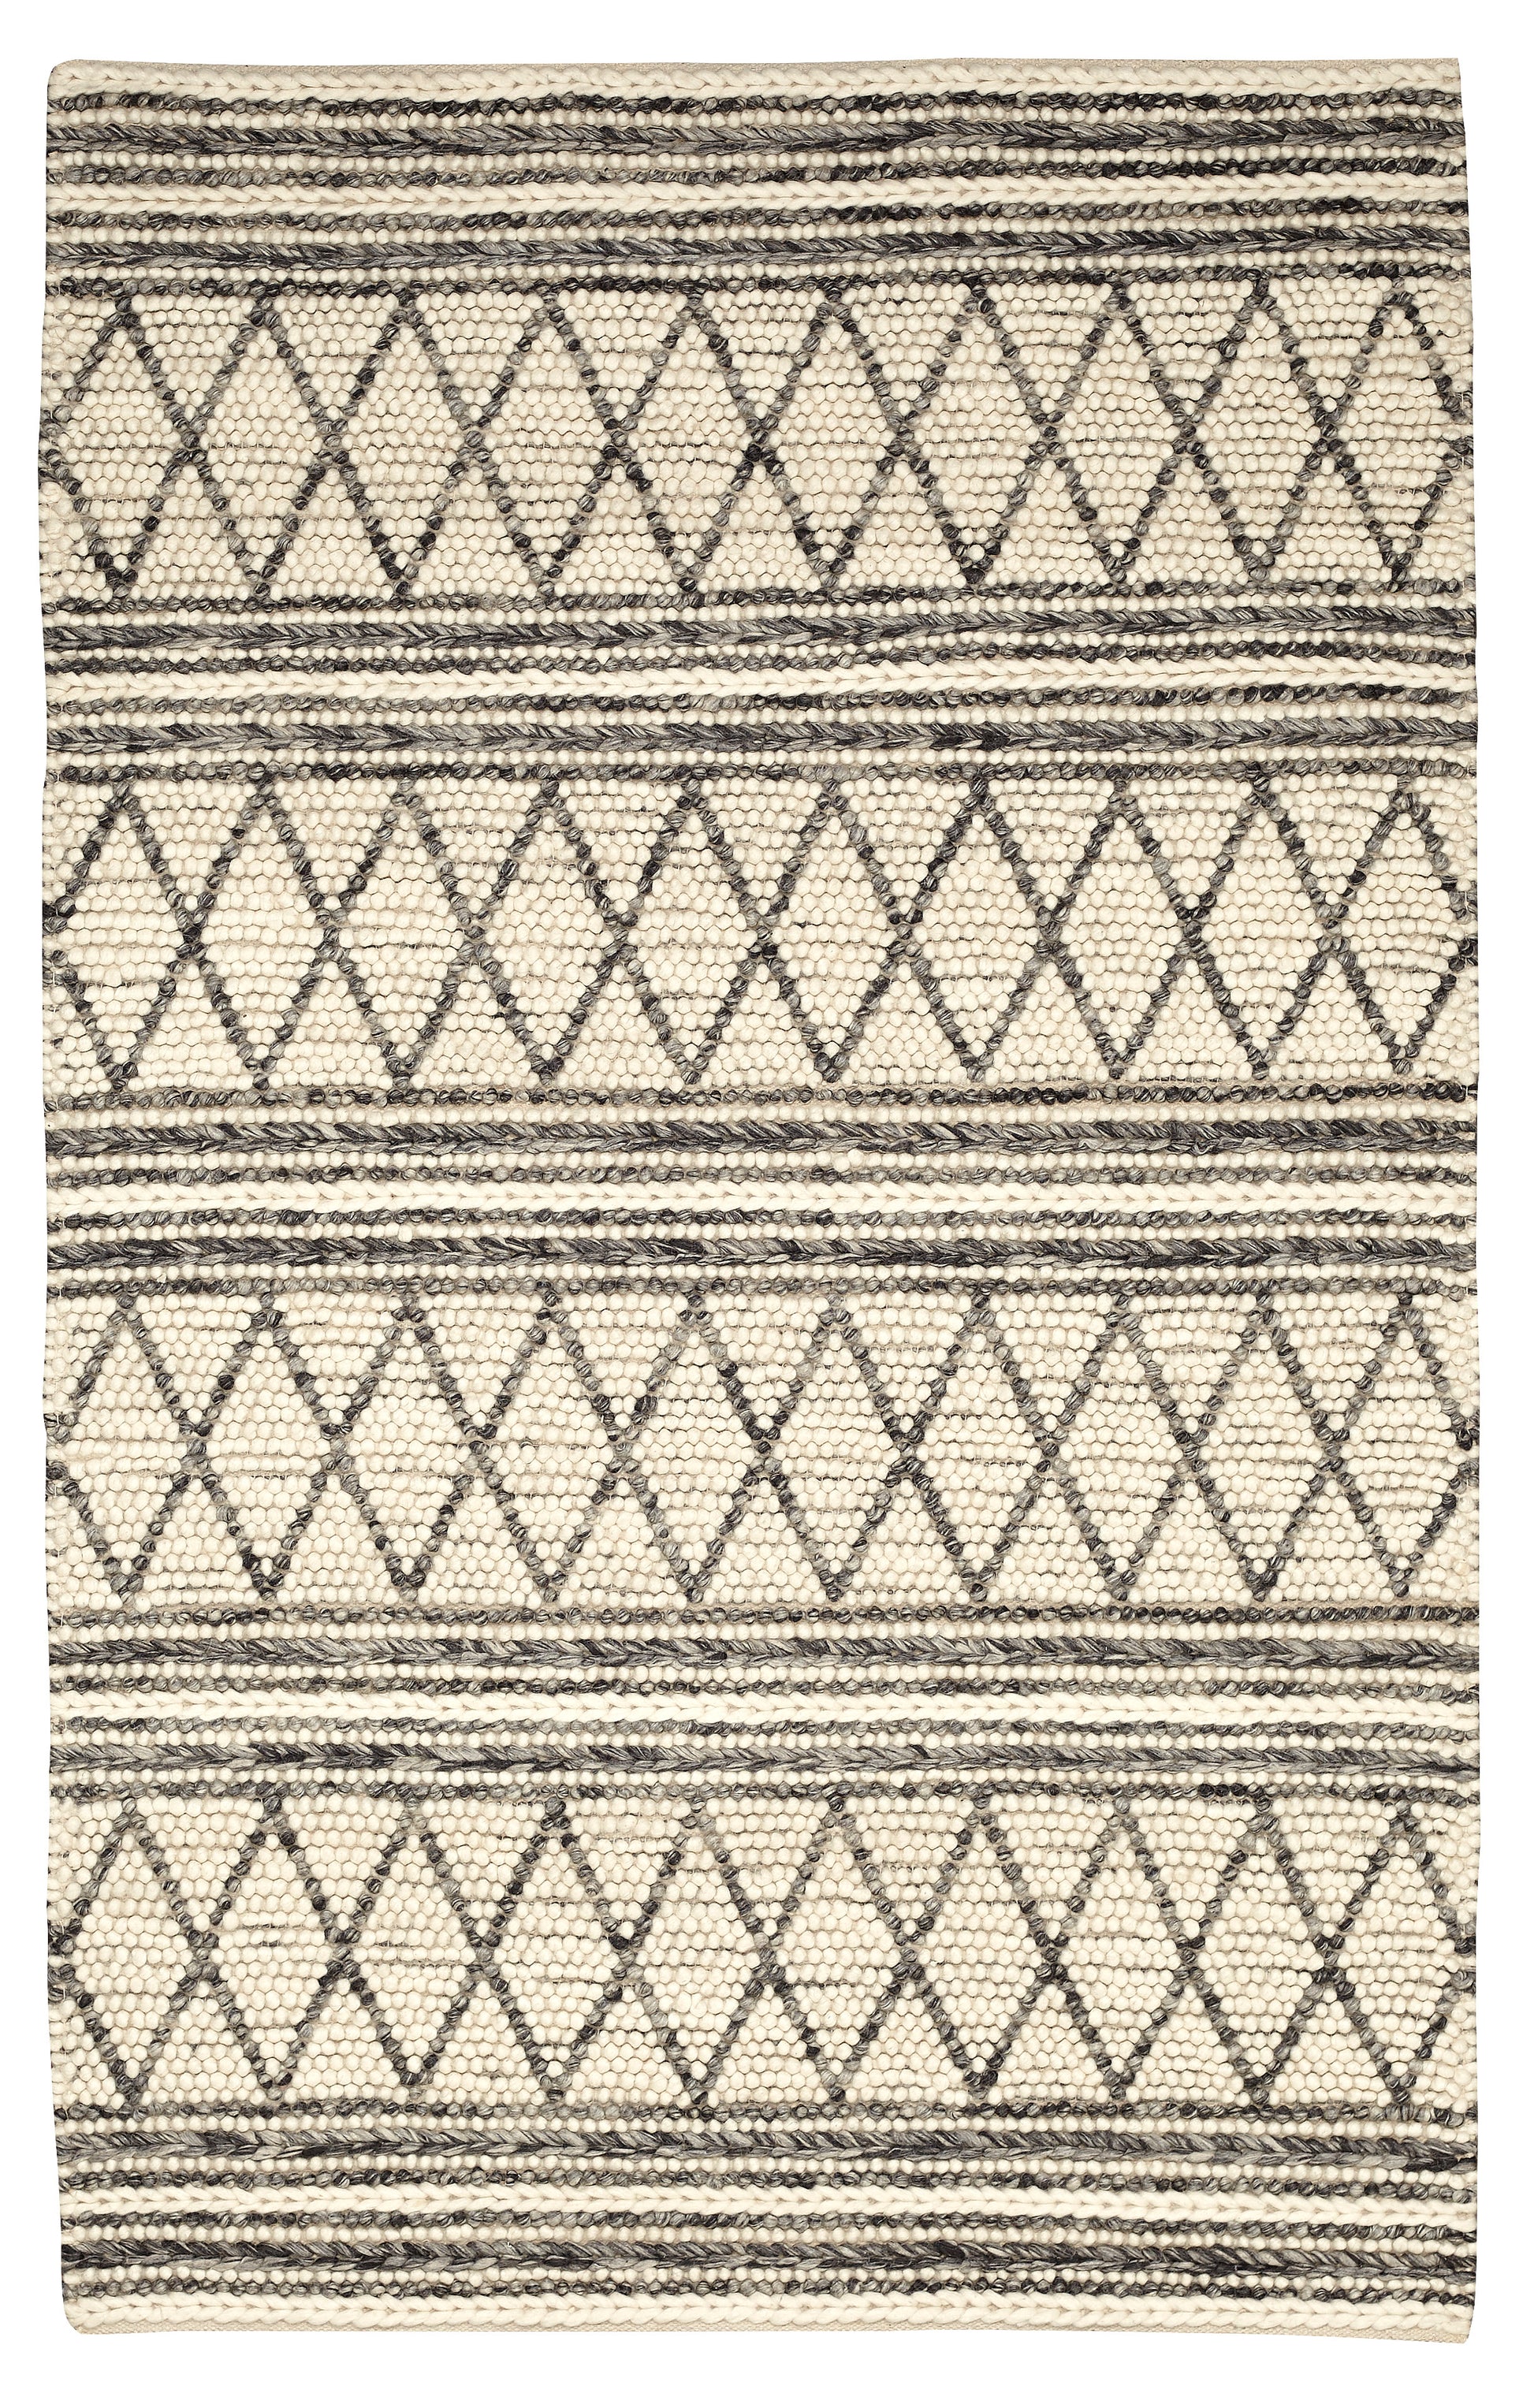 Hand Knotted Wool Ivory Grey Area Rug - Erbanica